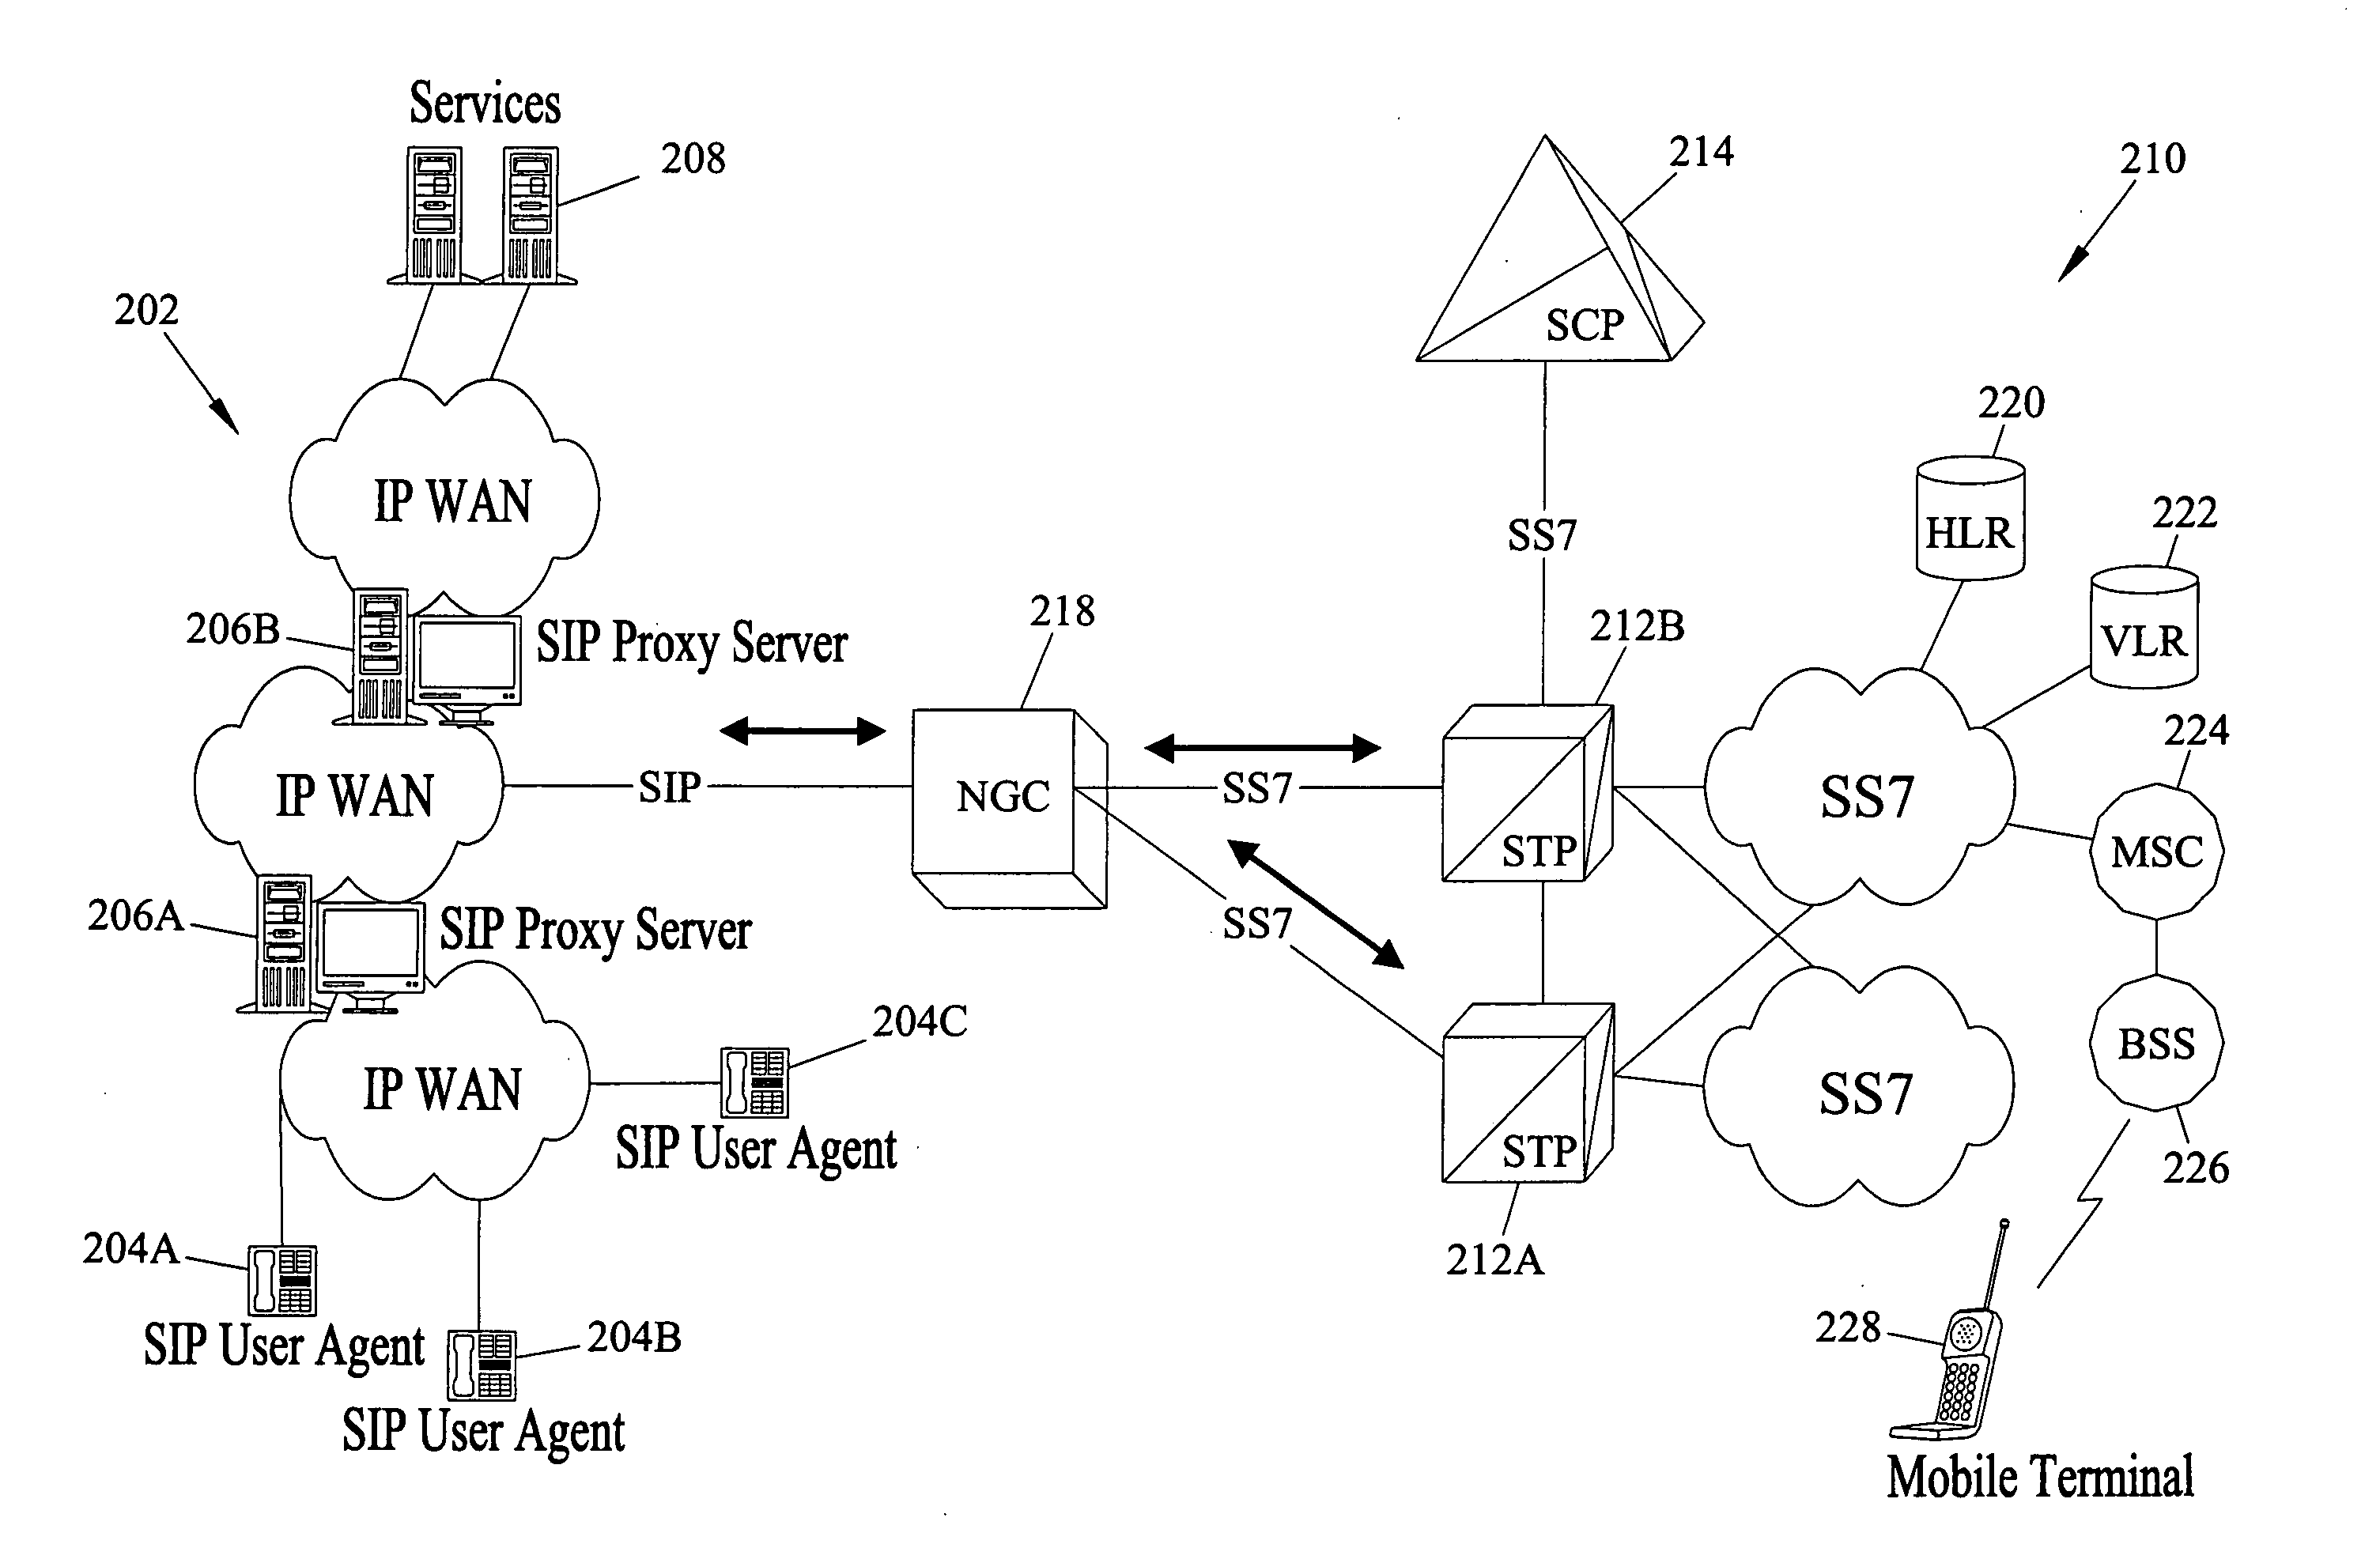 Methods and systems for converting an internet protocol (IP)-based message containing subscriber content to a public switched telephone network (PSTN)-based message including subscriber content